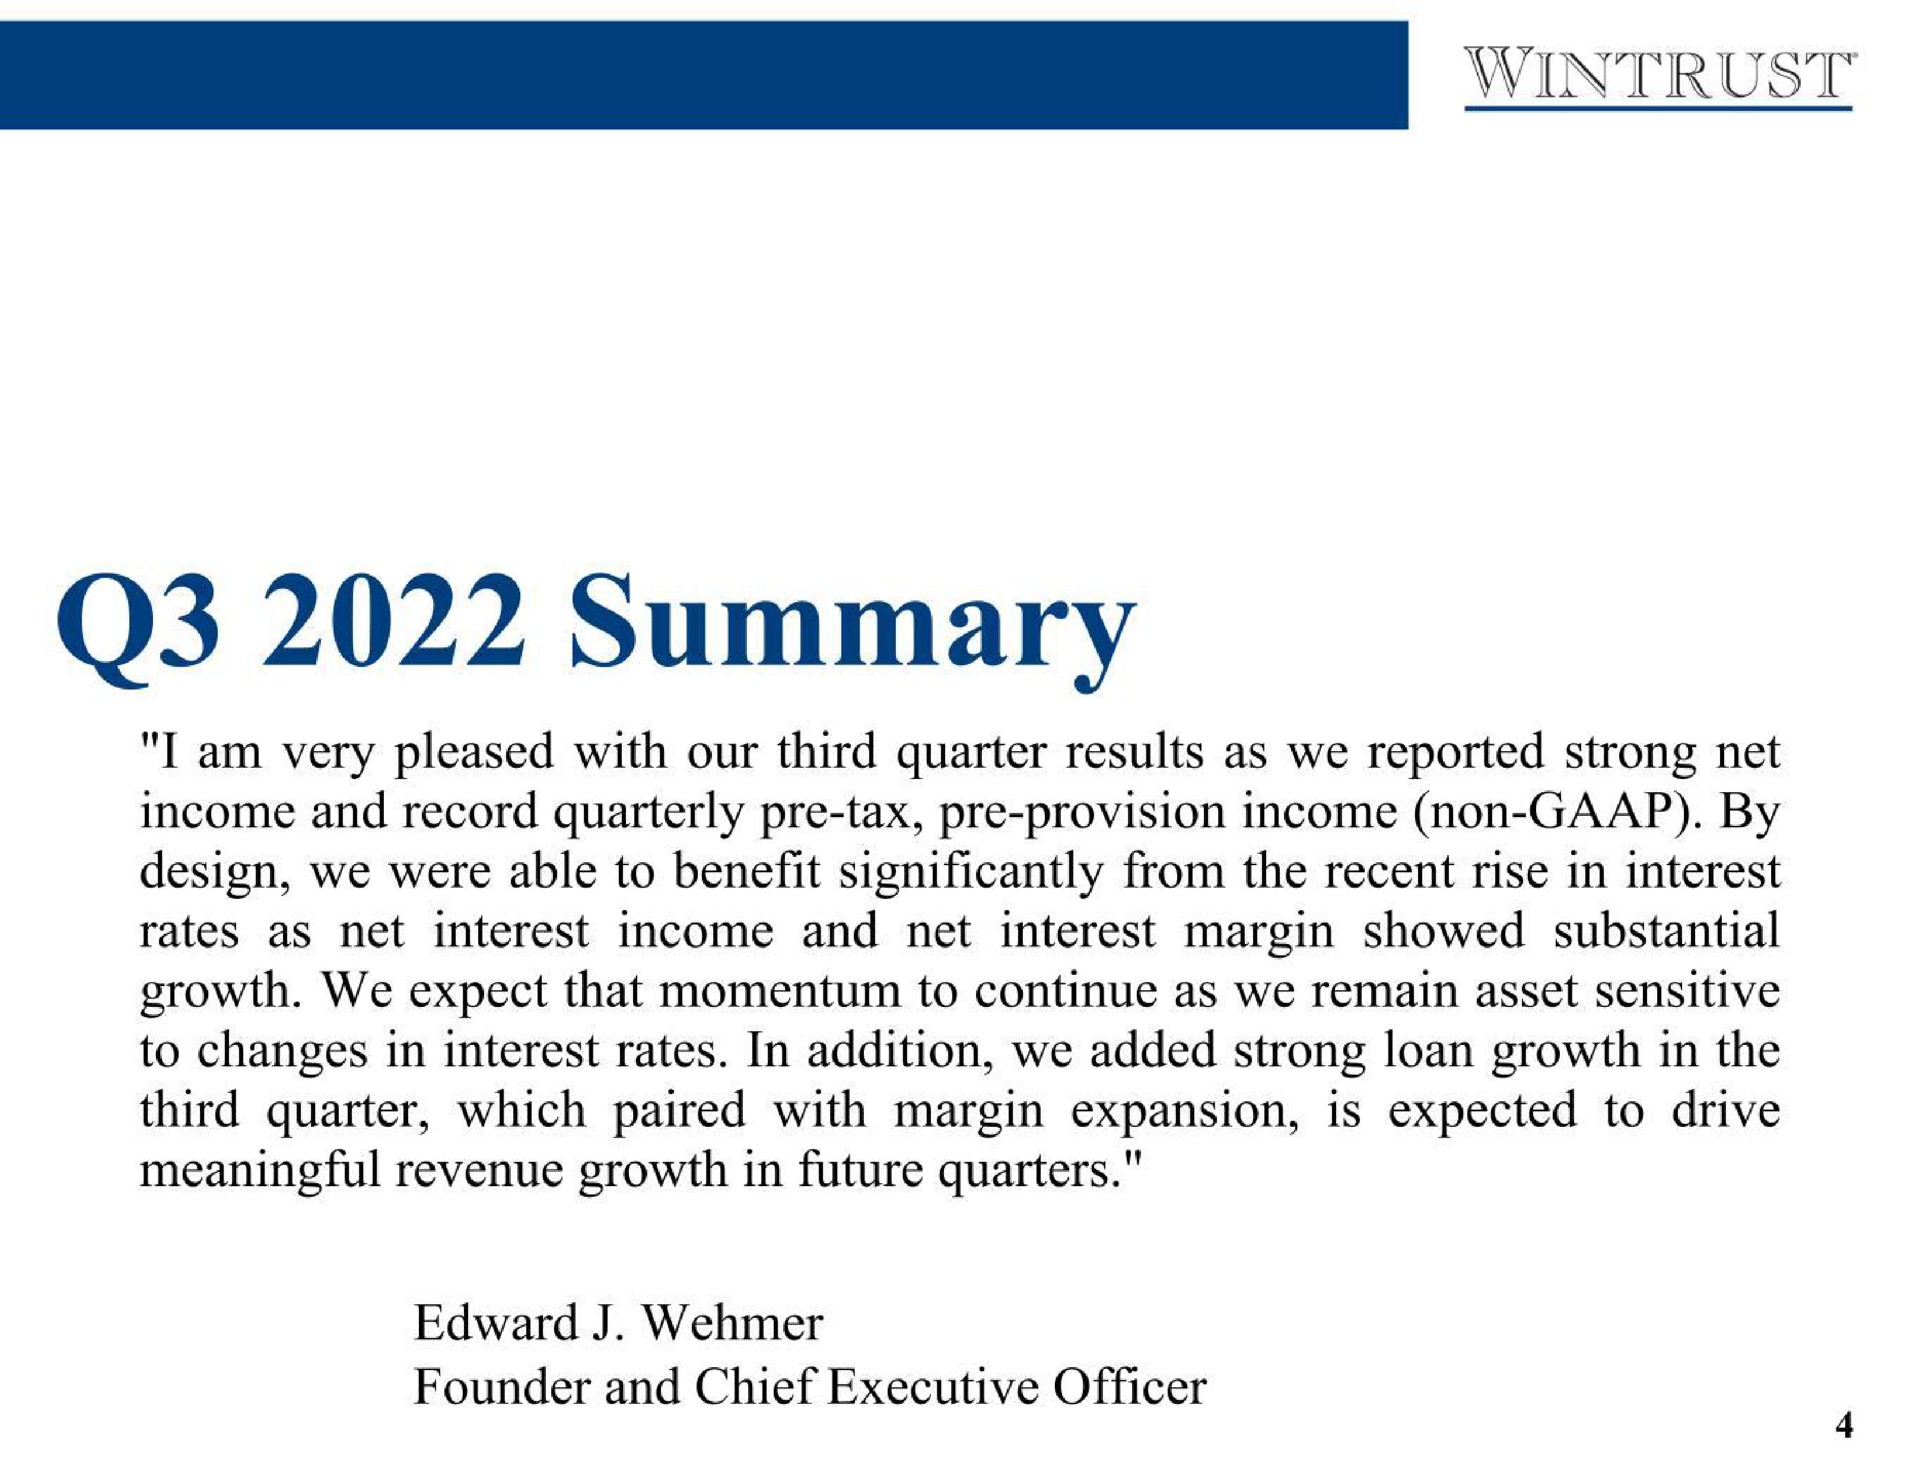 summary i am very pleased with our third quarter results as we reported strong net income and record quarterly tax provision income non by design we were able to benefit significantly from the recent rise in interest rates as net interest income and net interest margin showed substantial growth we expect that momentum to continue as we remain asset sensitive to changes in interest rates in addition we added strong loan growth in the third quarter which paired with margin expansion is expected to drive meaningful revenue growth in future quarters founder and chief executive officer | Wintrust Financial